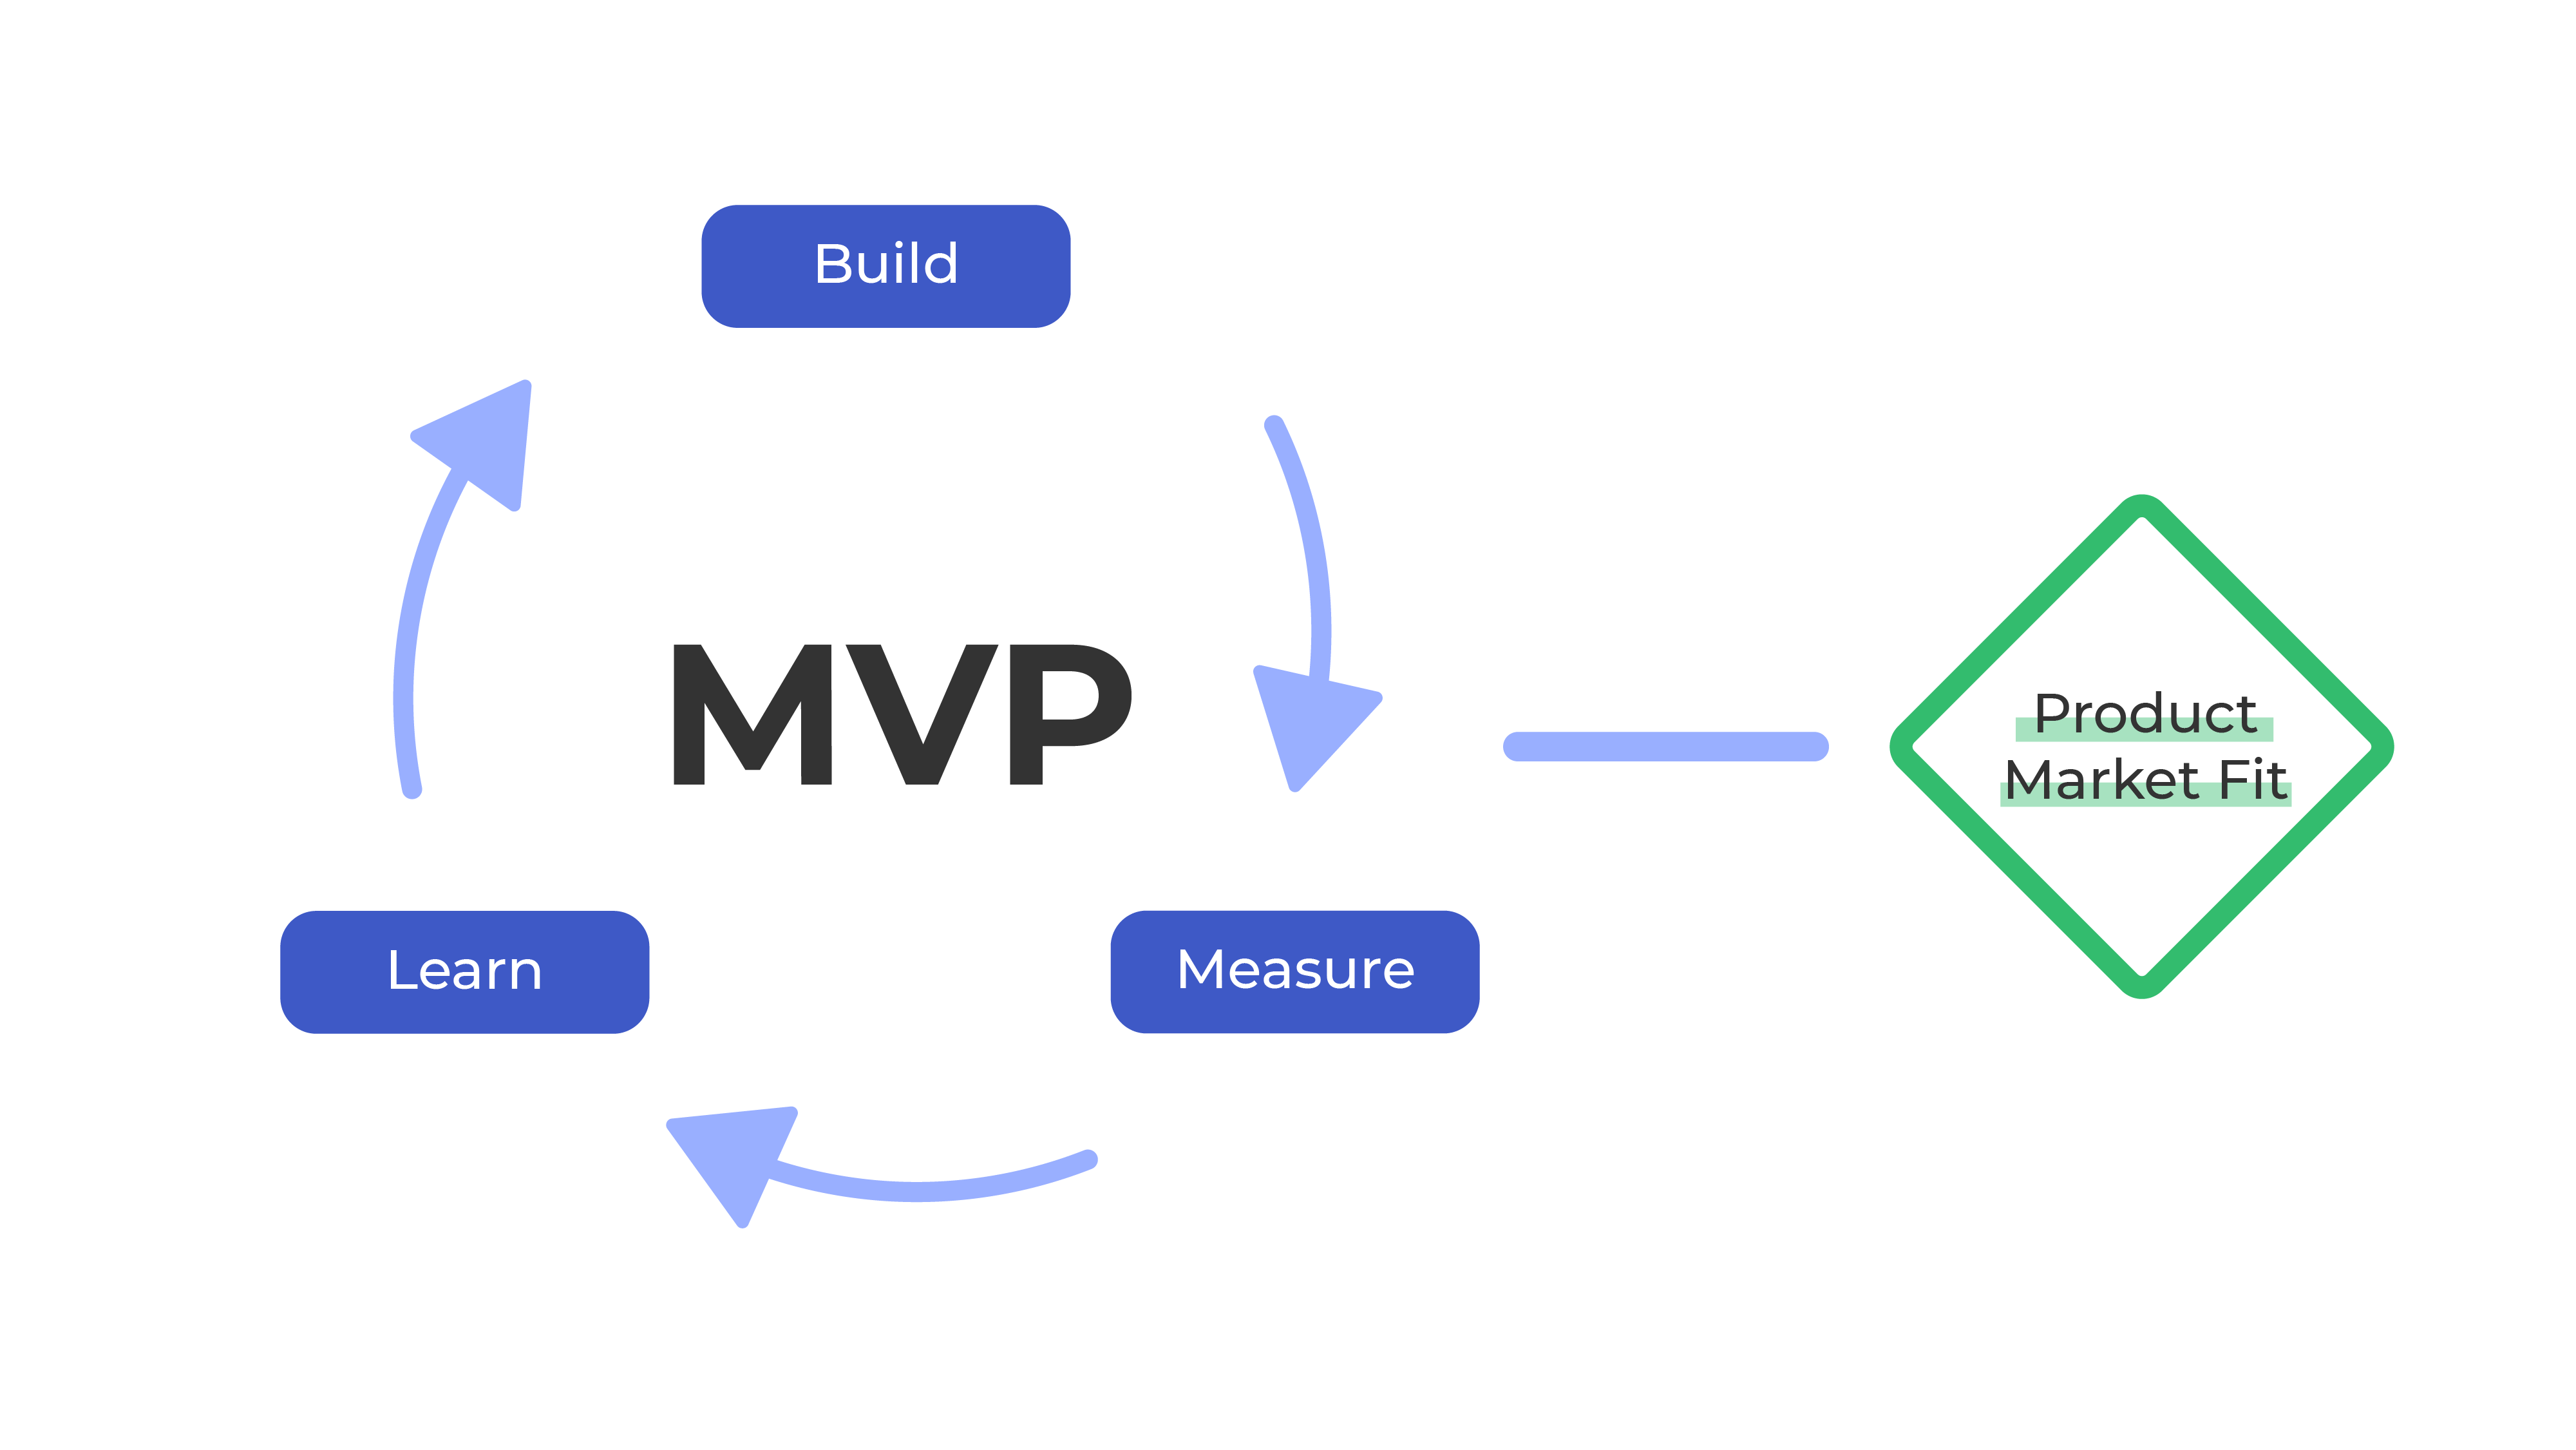 When the minimum viable product (MPV) meets the product-market fit